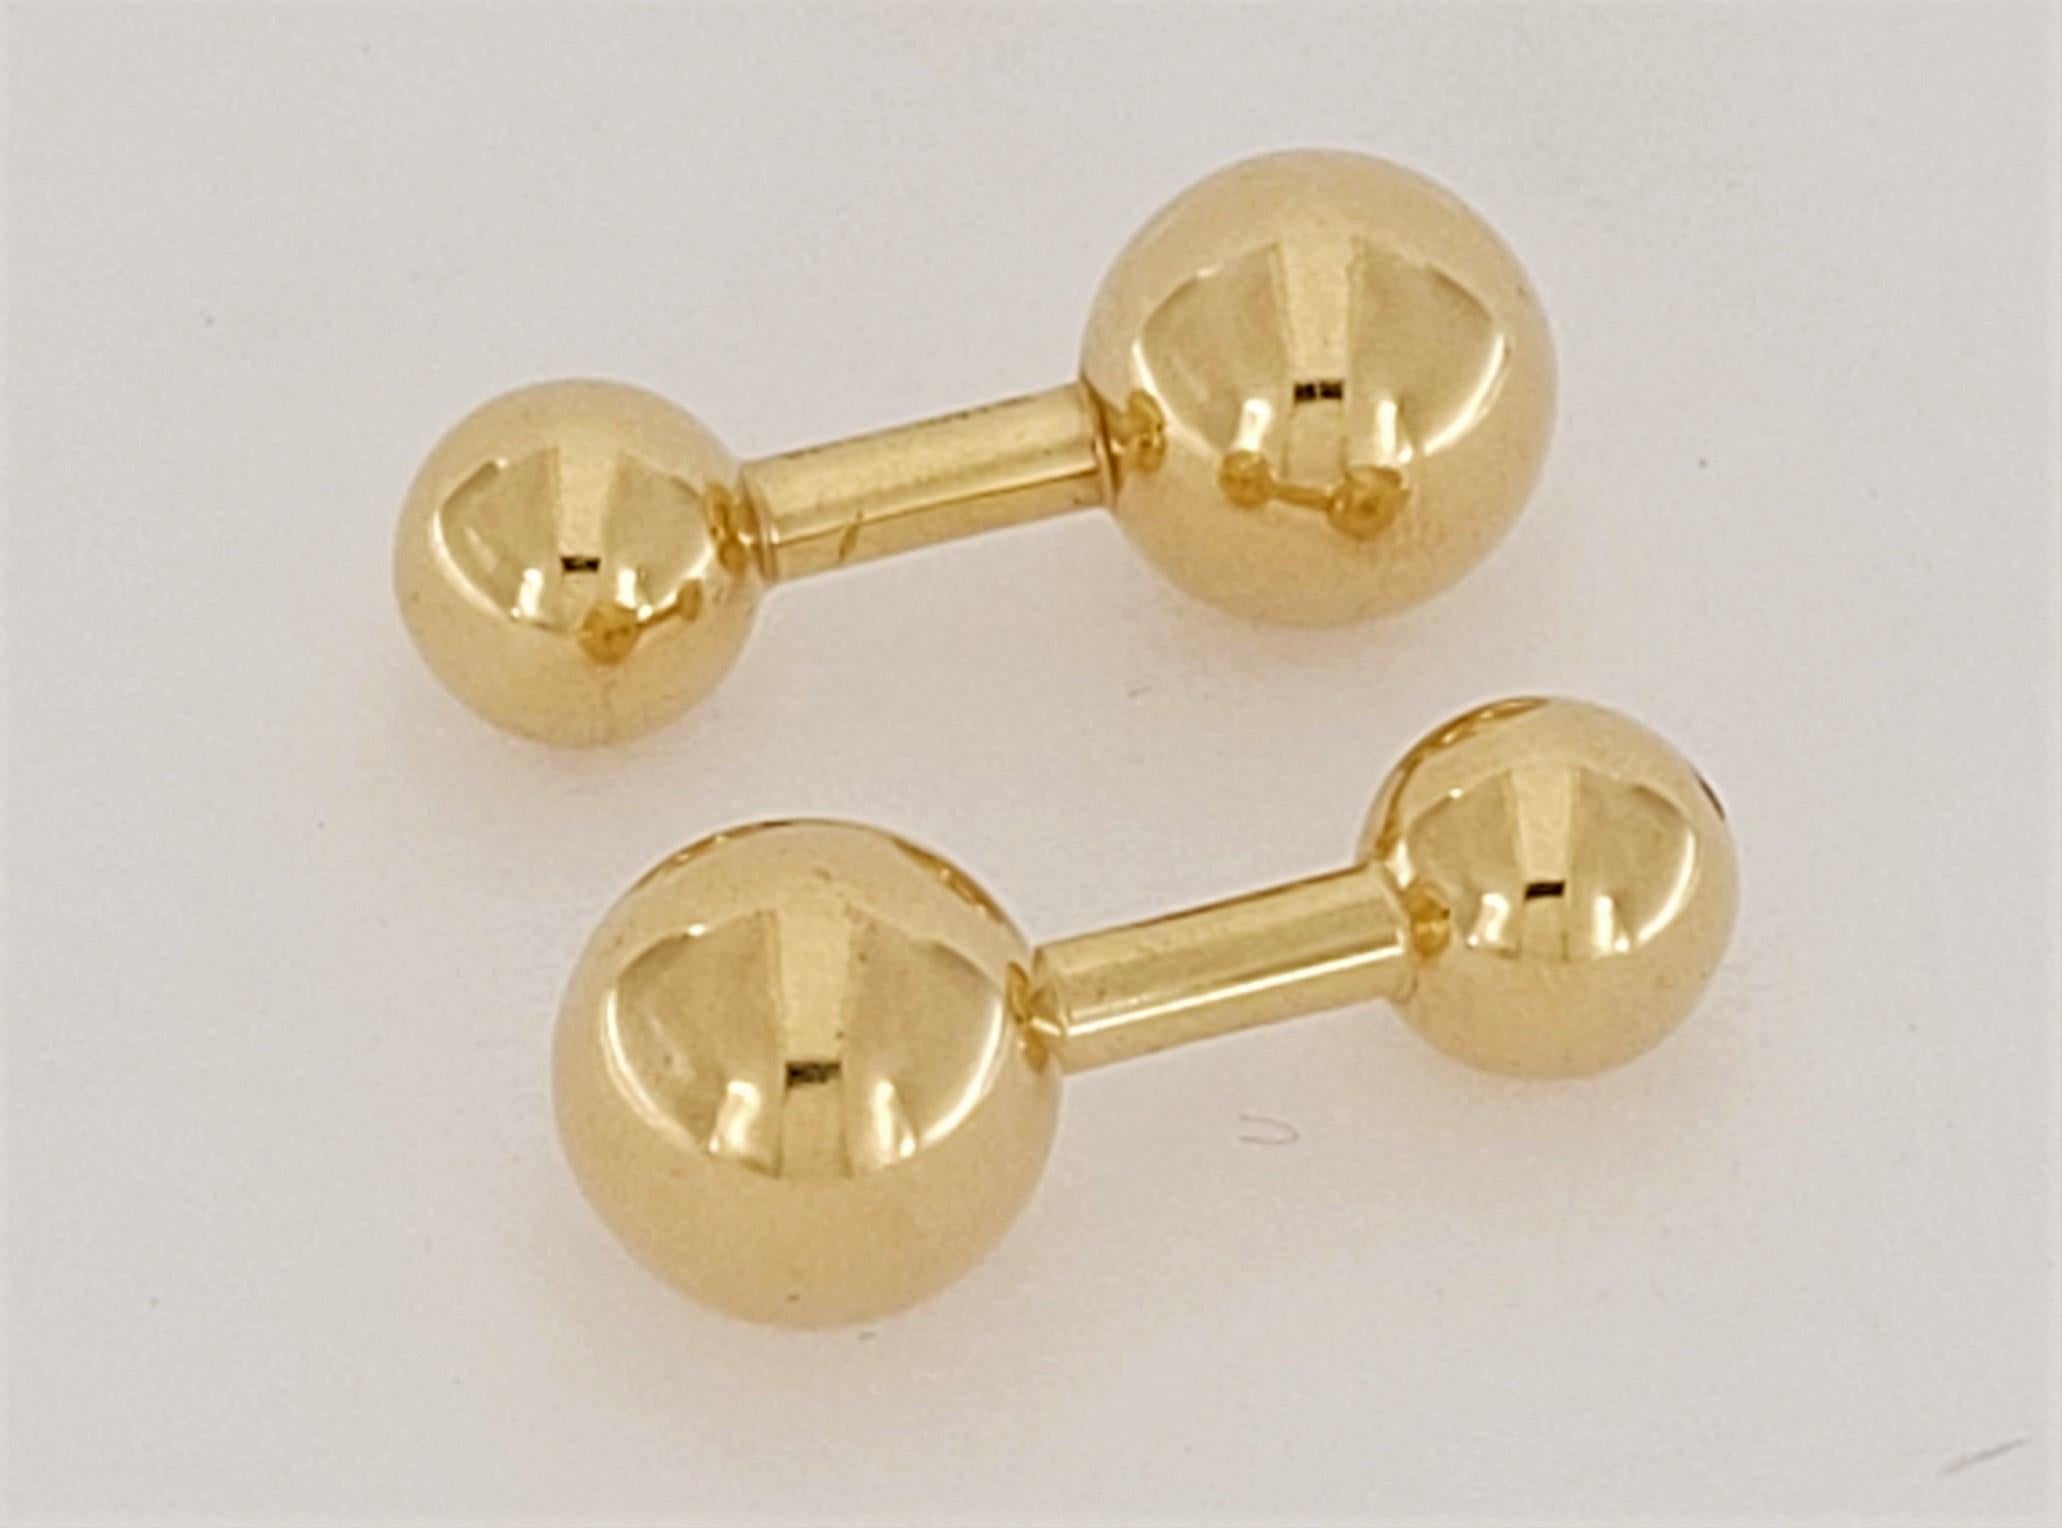 Tiffany and Co Solid Yellow Gold Ball Cufflinks 1.10 Inch Long In Excellent Condition For Sale In New York, NY